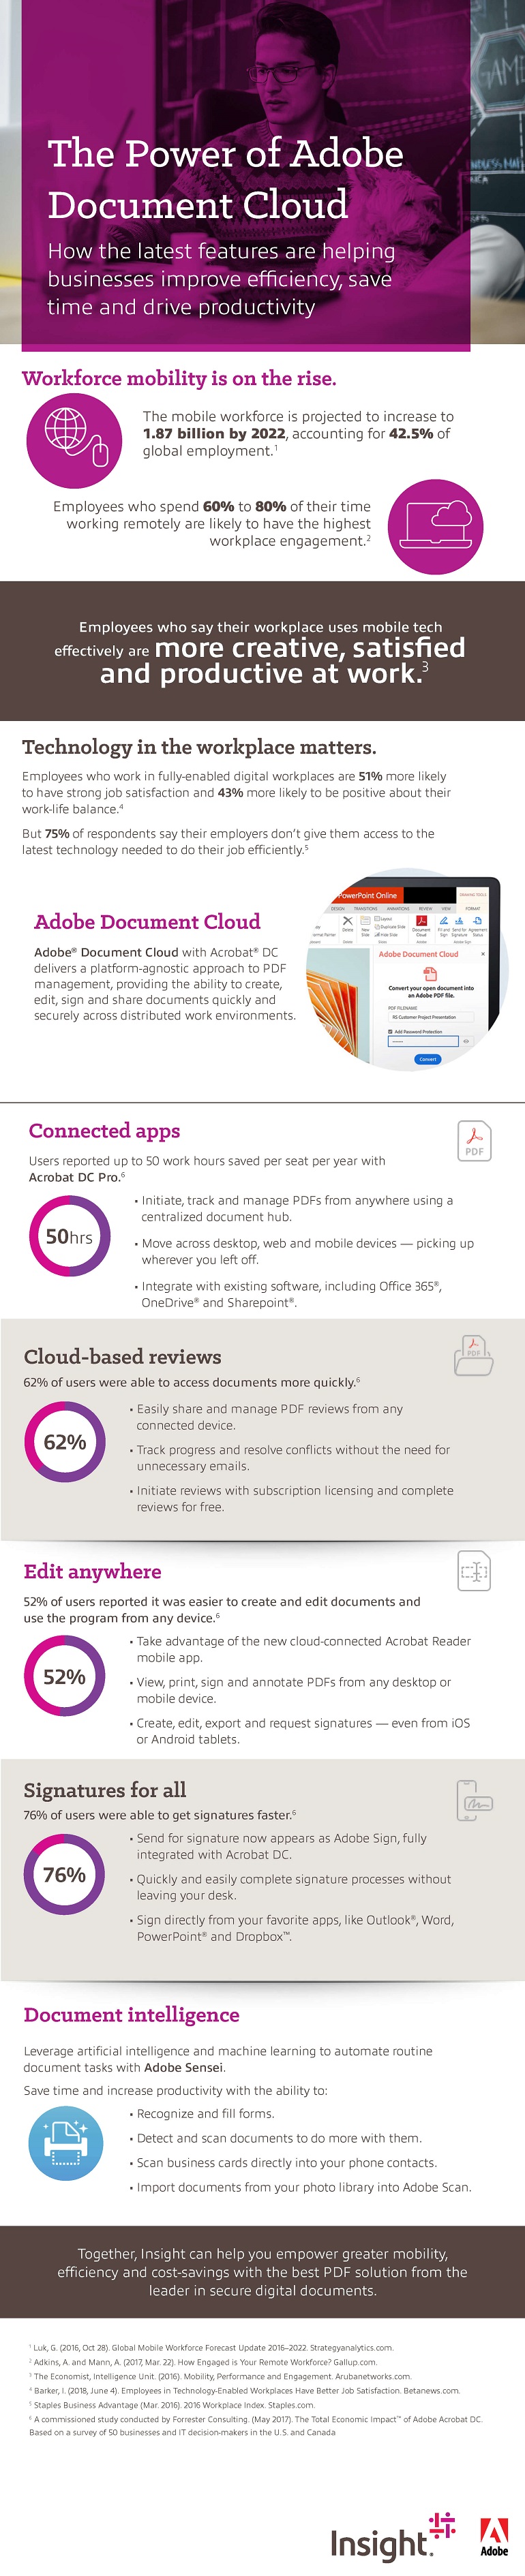 Infographic displaying The Power of Adobe Document Cloud. Translated below.